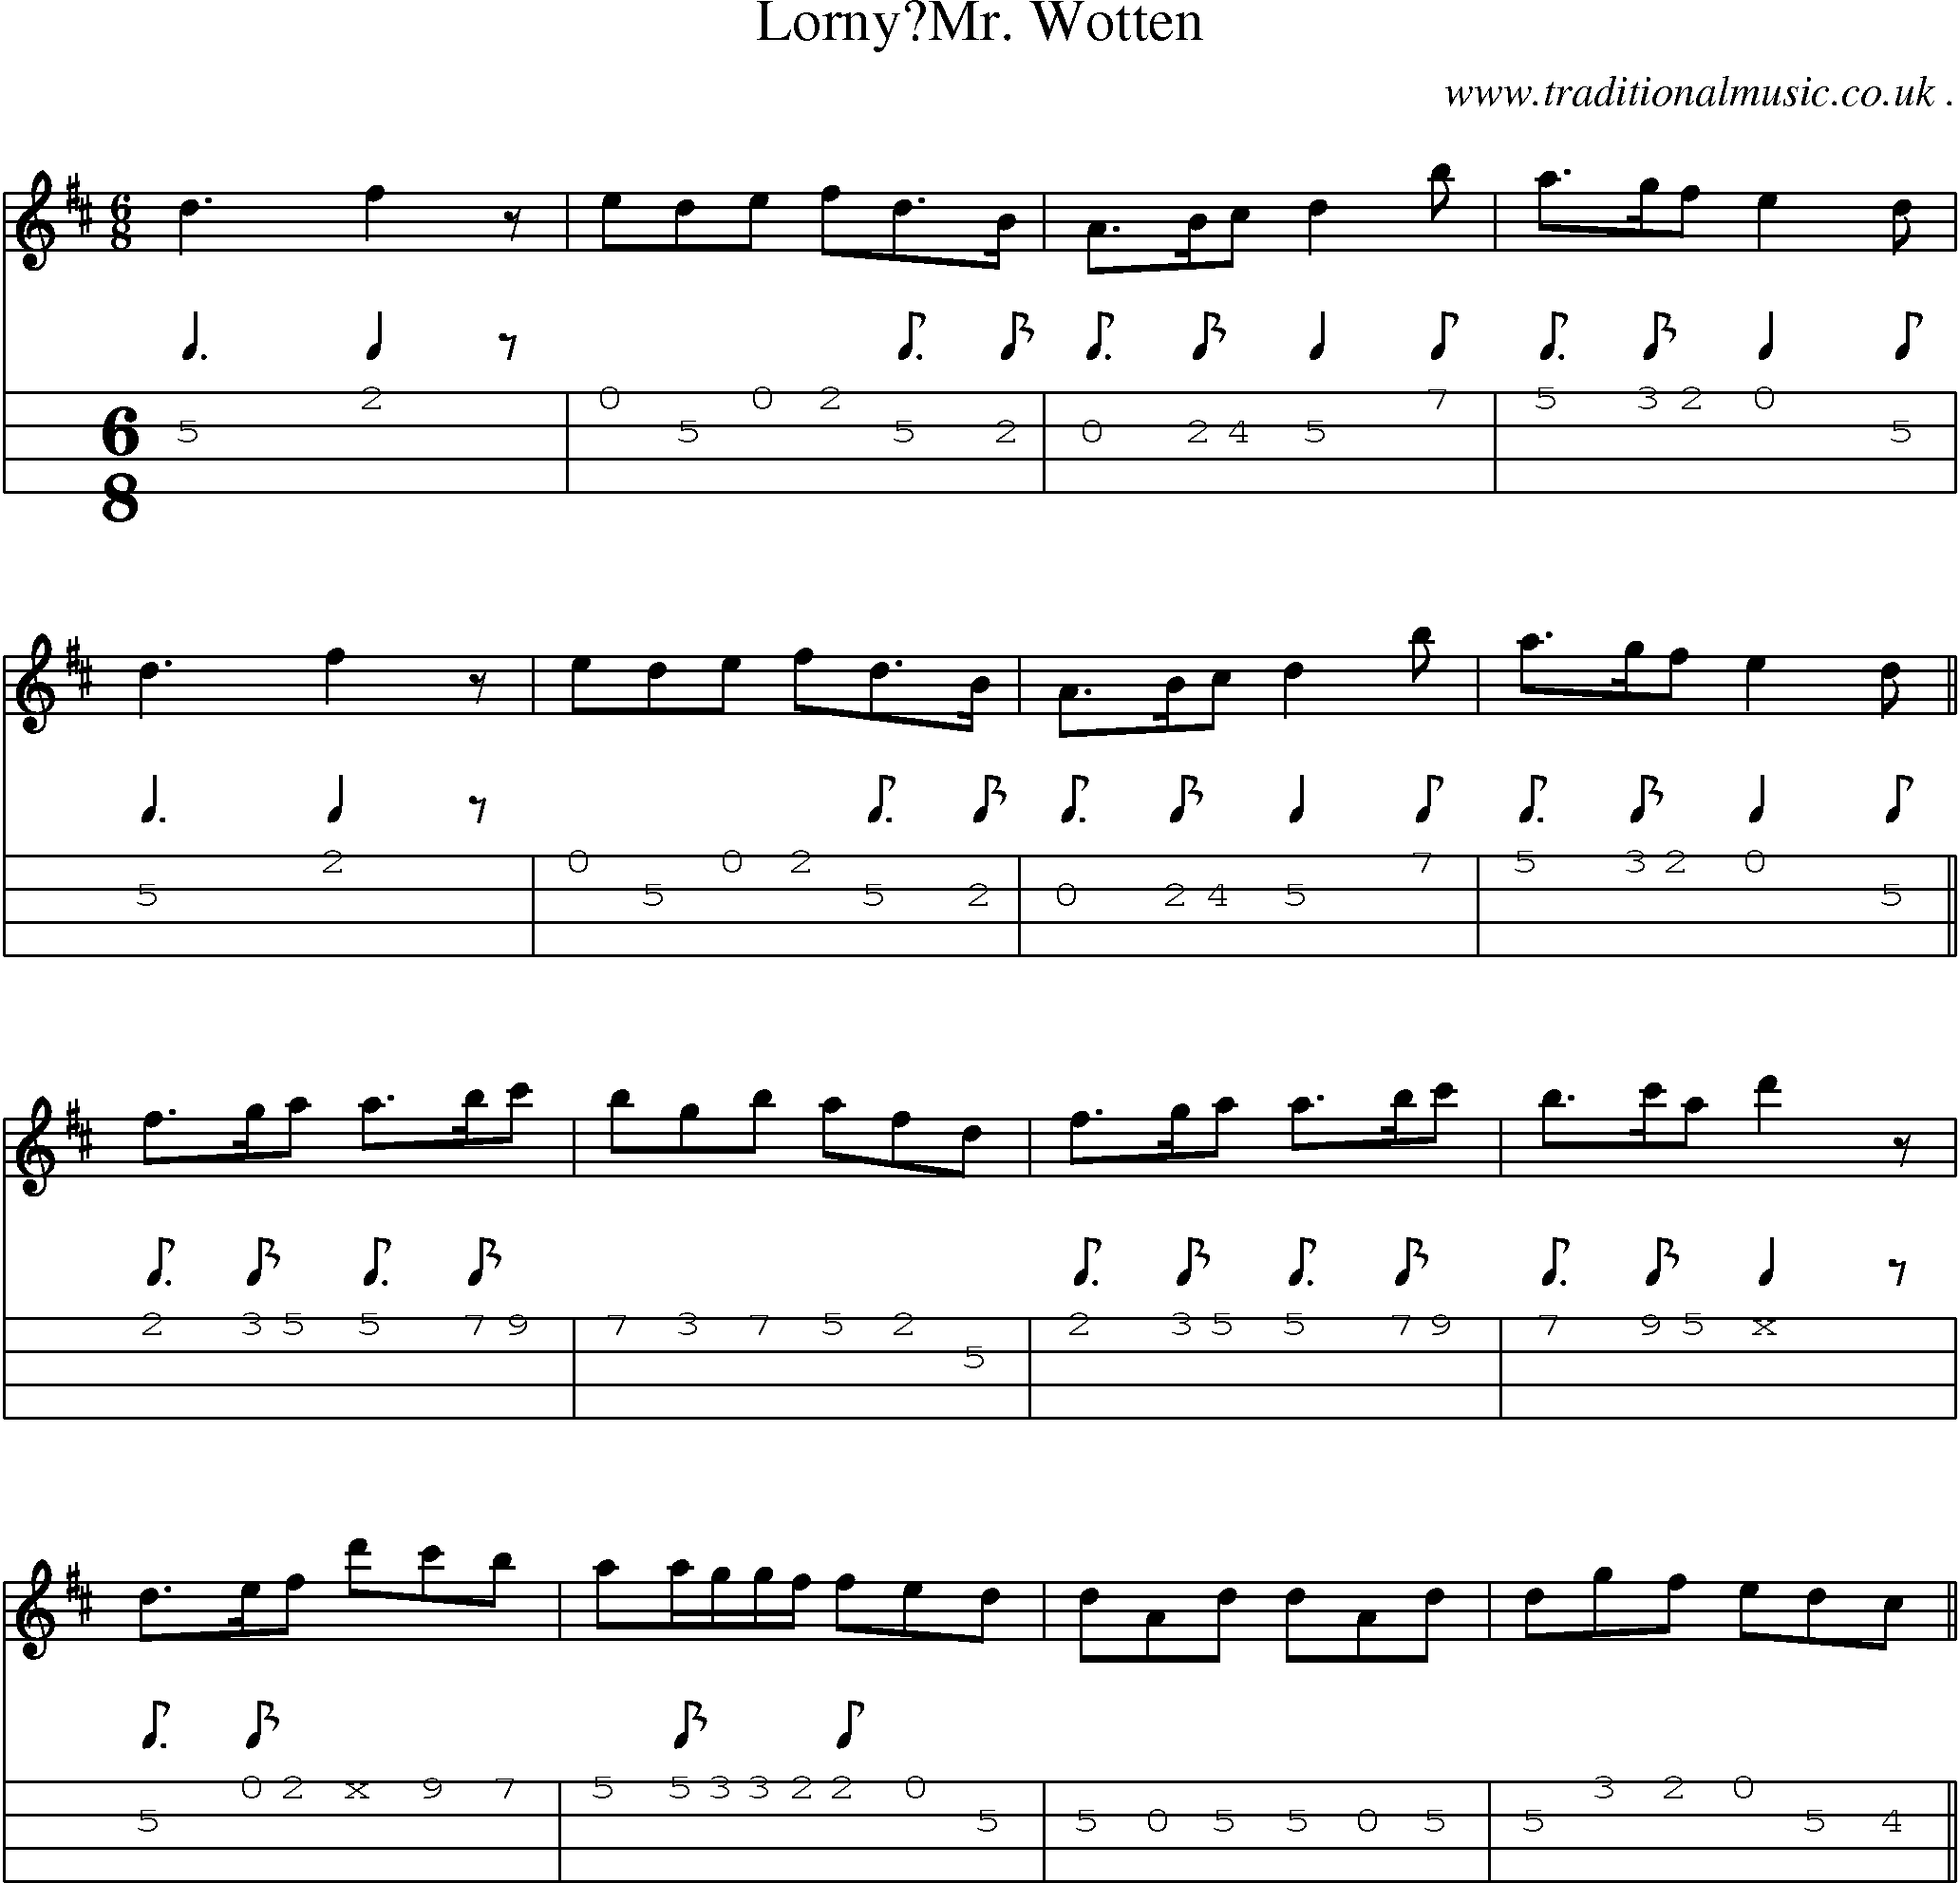 Sheet-Music and Mandolin Tabs for Lornymr Wotten